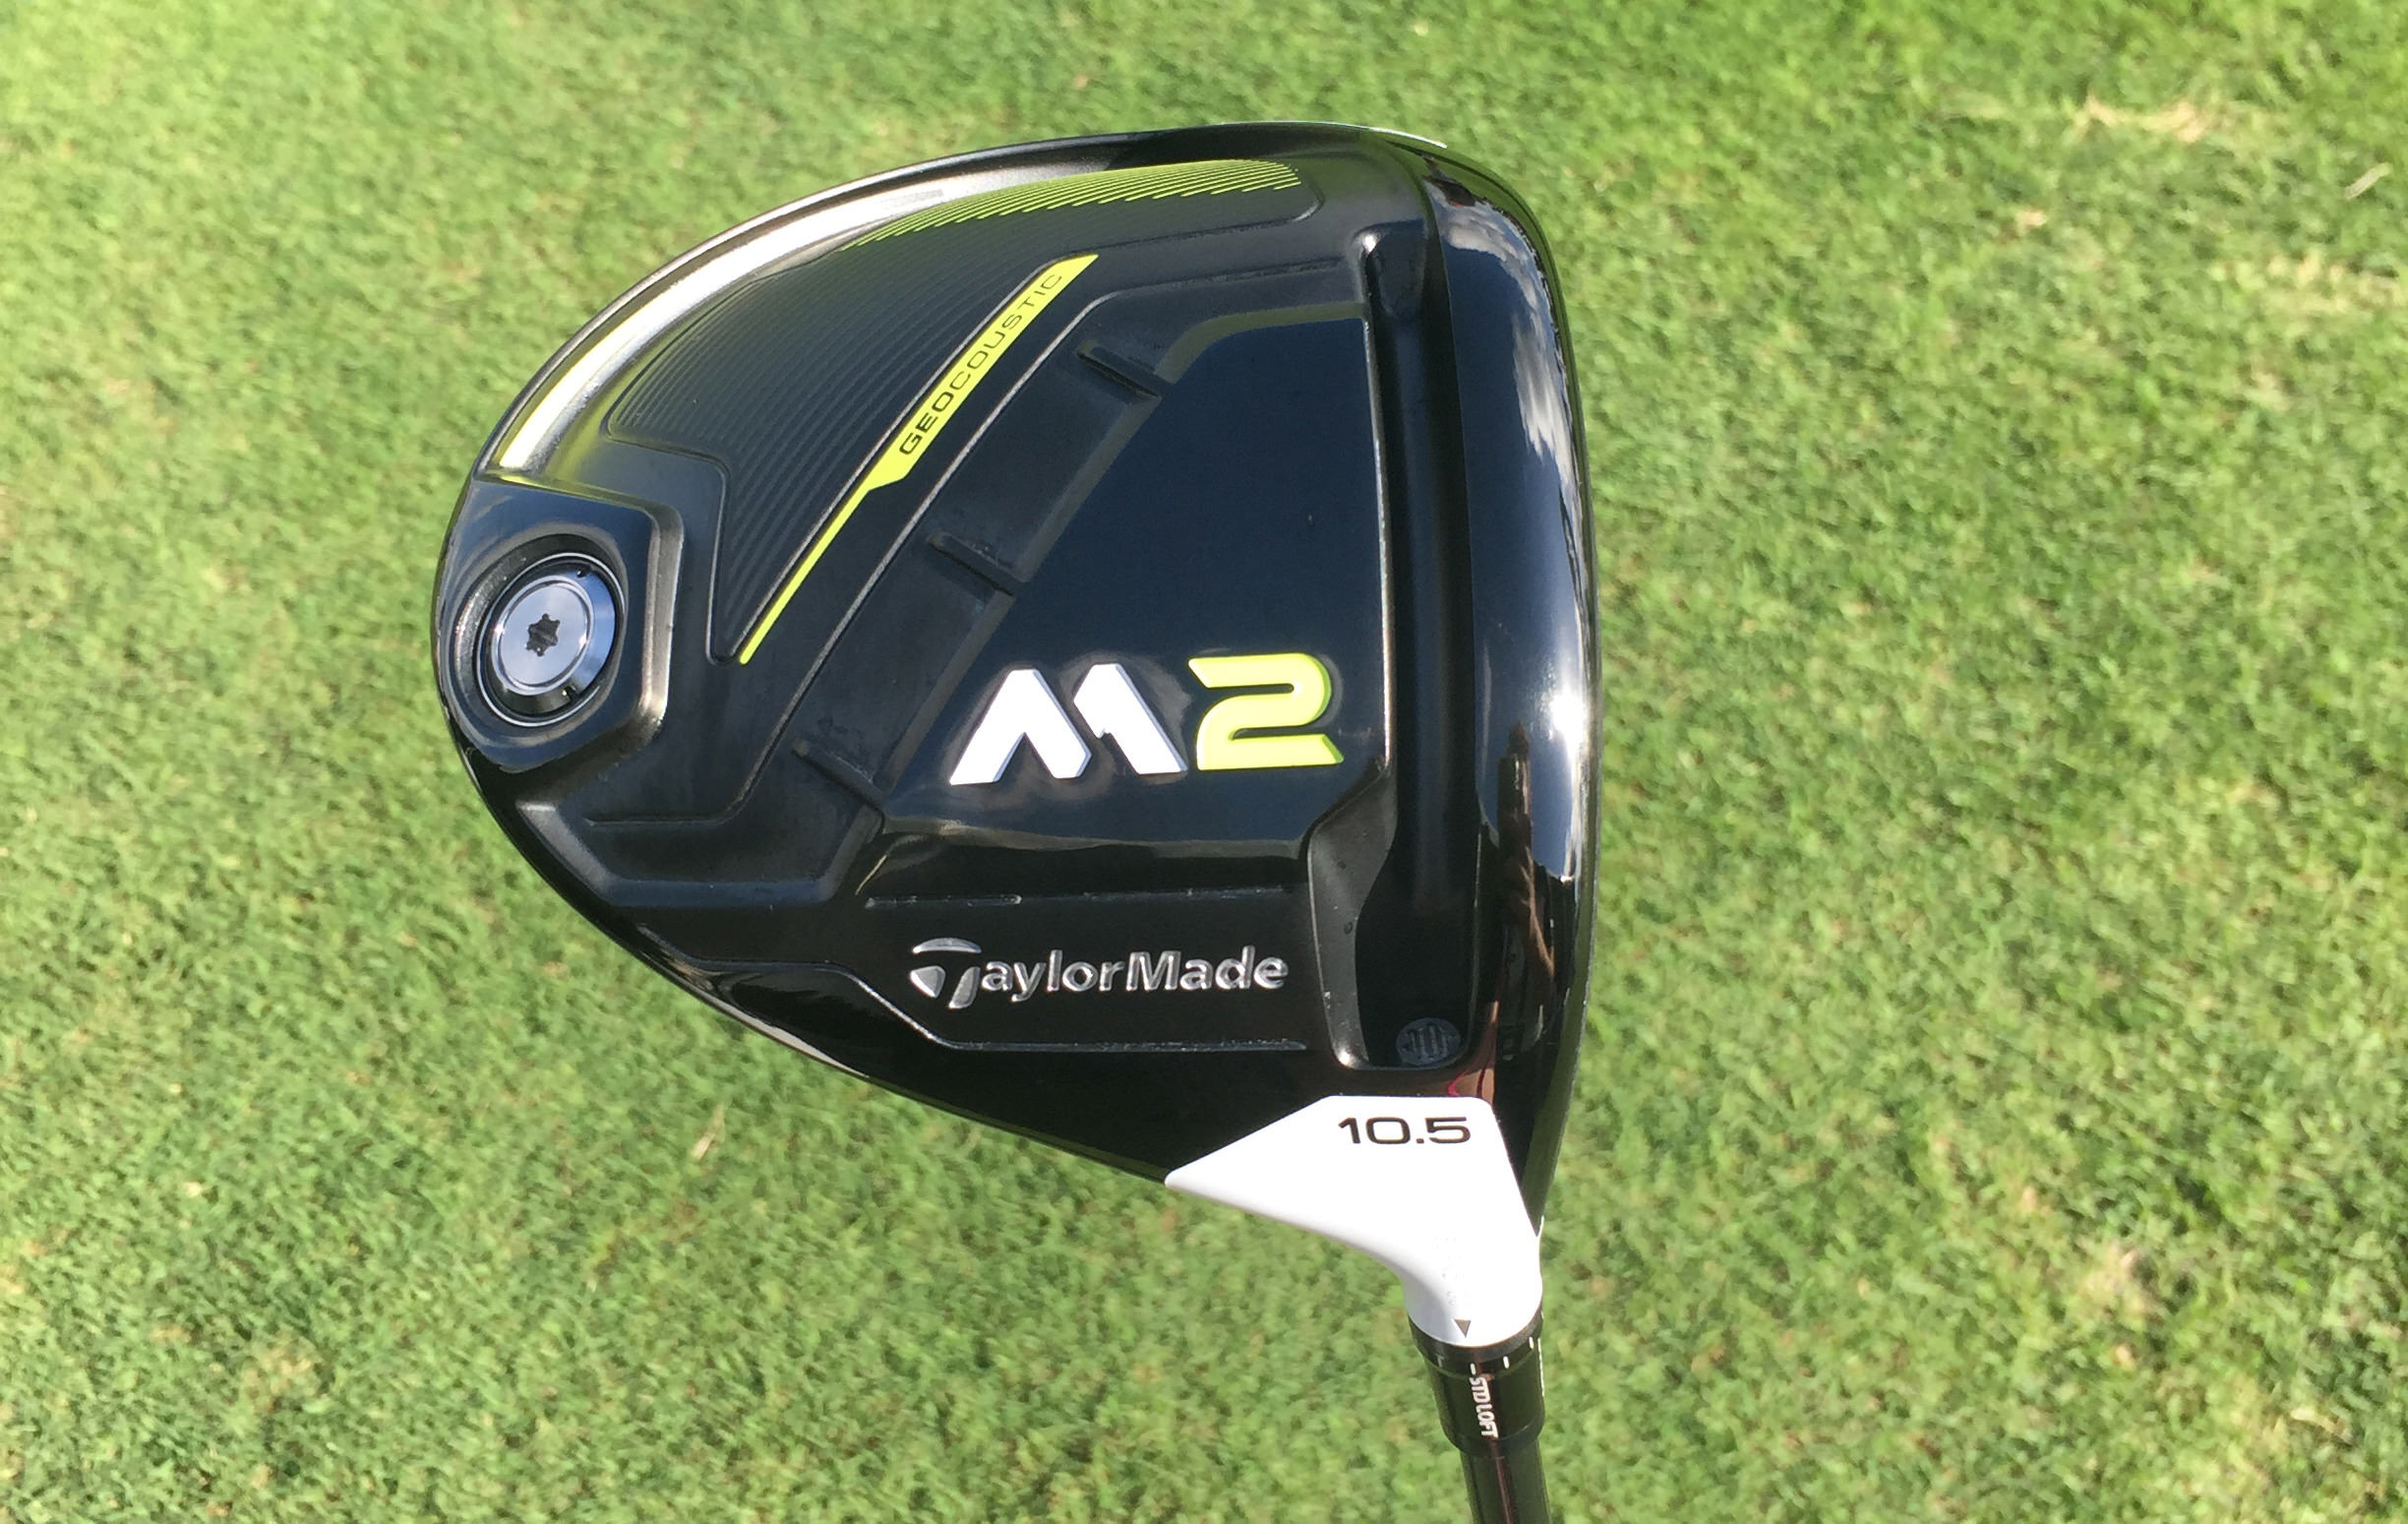 TaylorMade 2017 M2 driver review